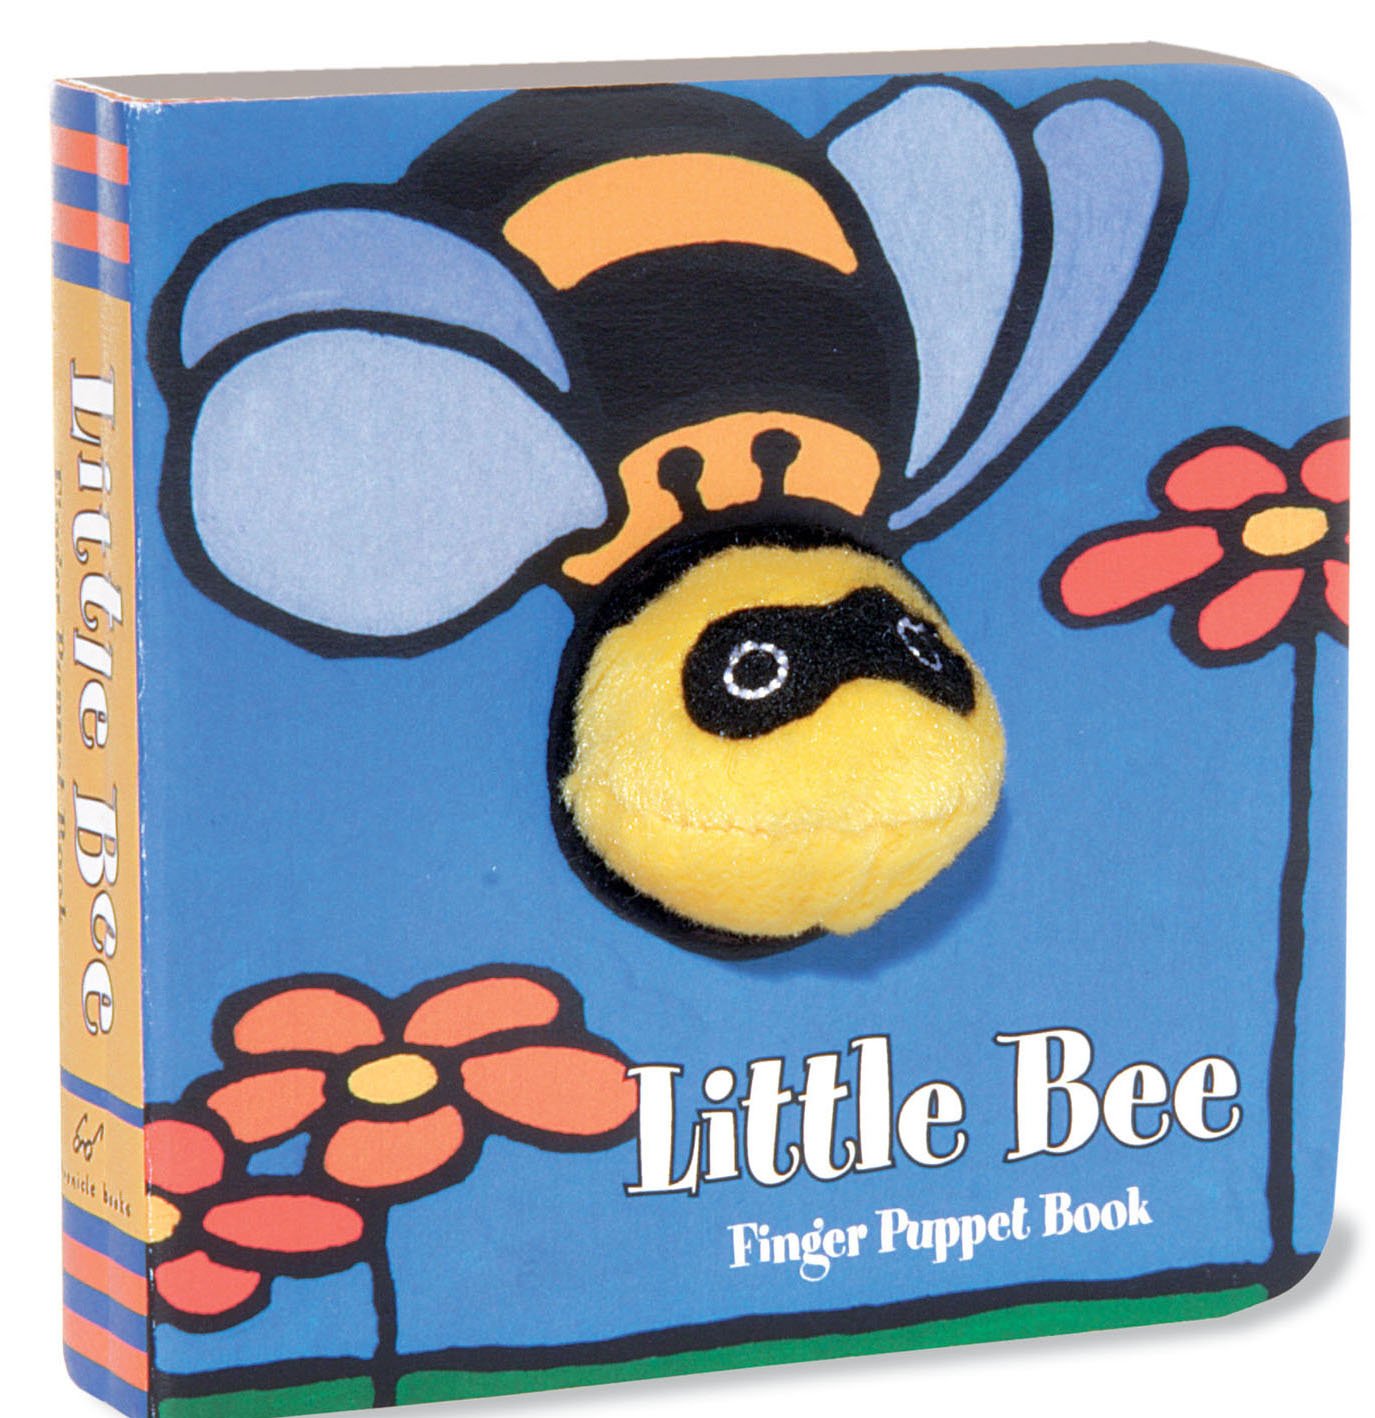 Little Bee: Finger Puppet Book: (Finger Puppet Book for Toddlers and Babies, Baby Books for First Year, Animal Finger Puppets) (Little Finger Puppet Board Books, FING)